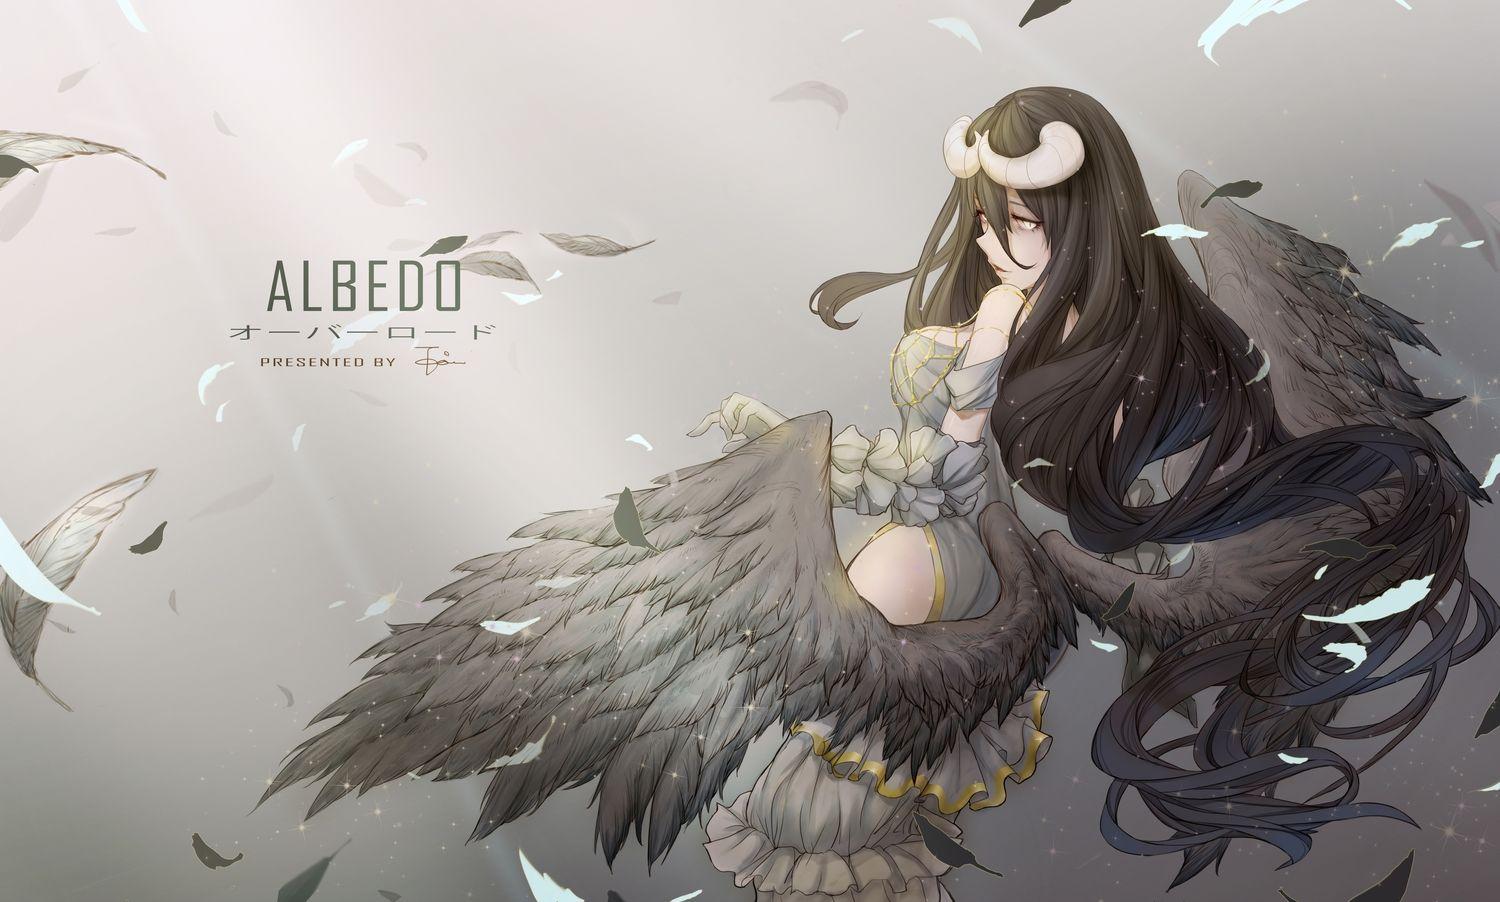 Wallpaper ID 447060  Anime Overlord Phone Wallpaper Albedo Overlord  720x1280 free download